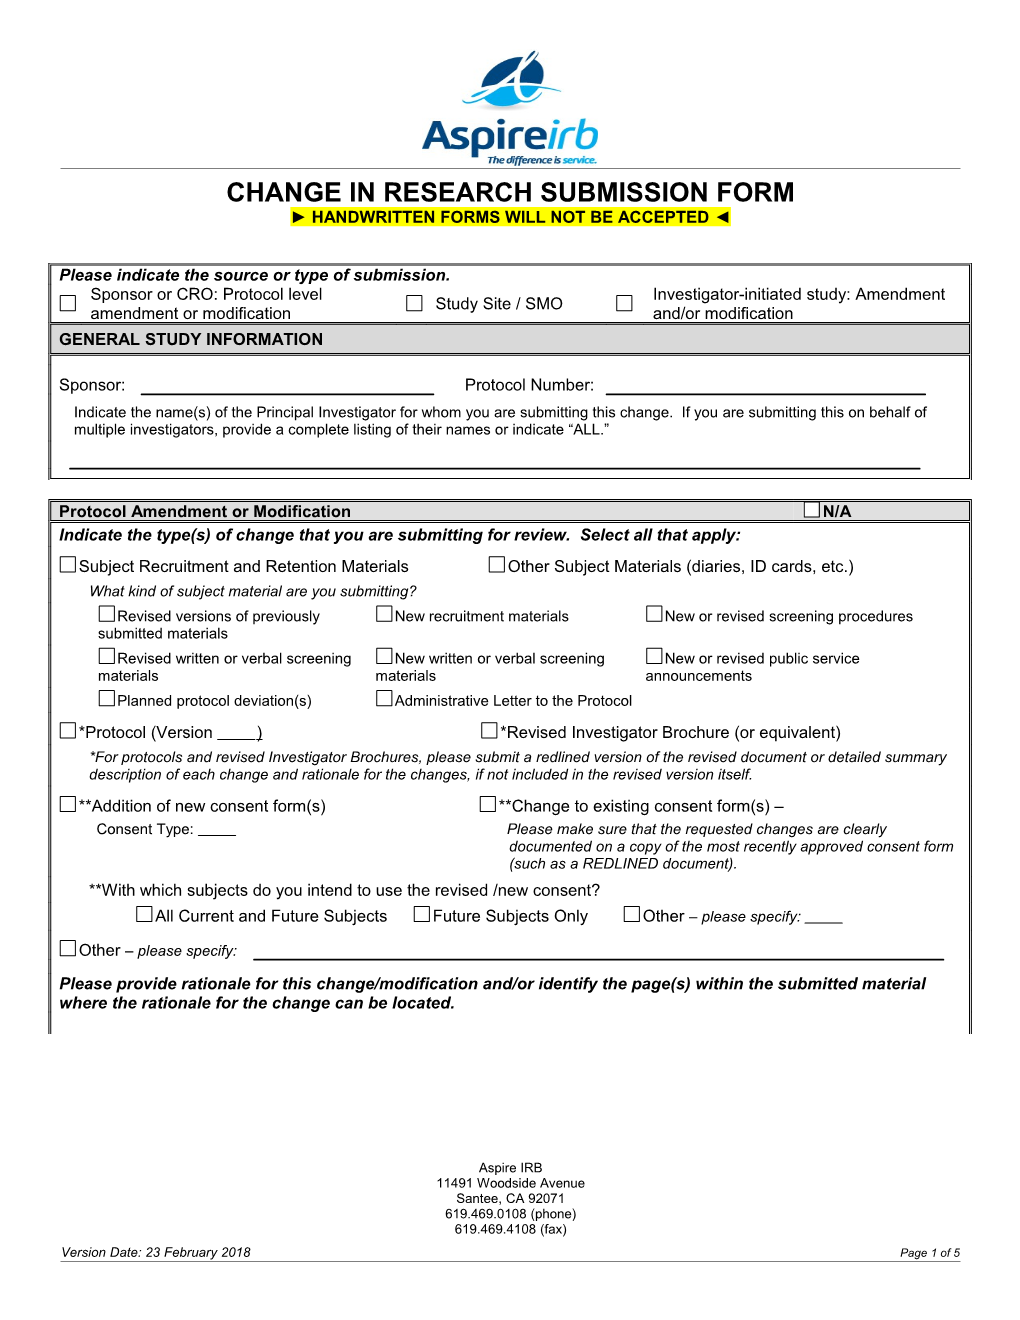 Change in Research Submission Form